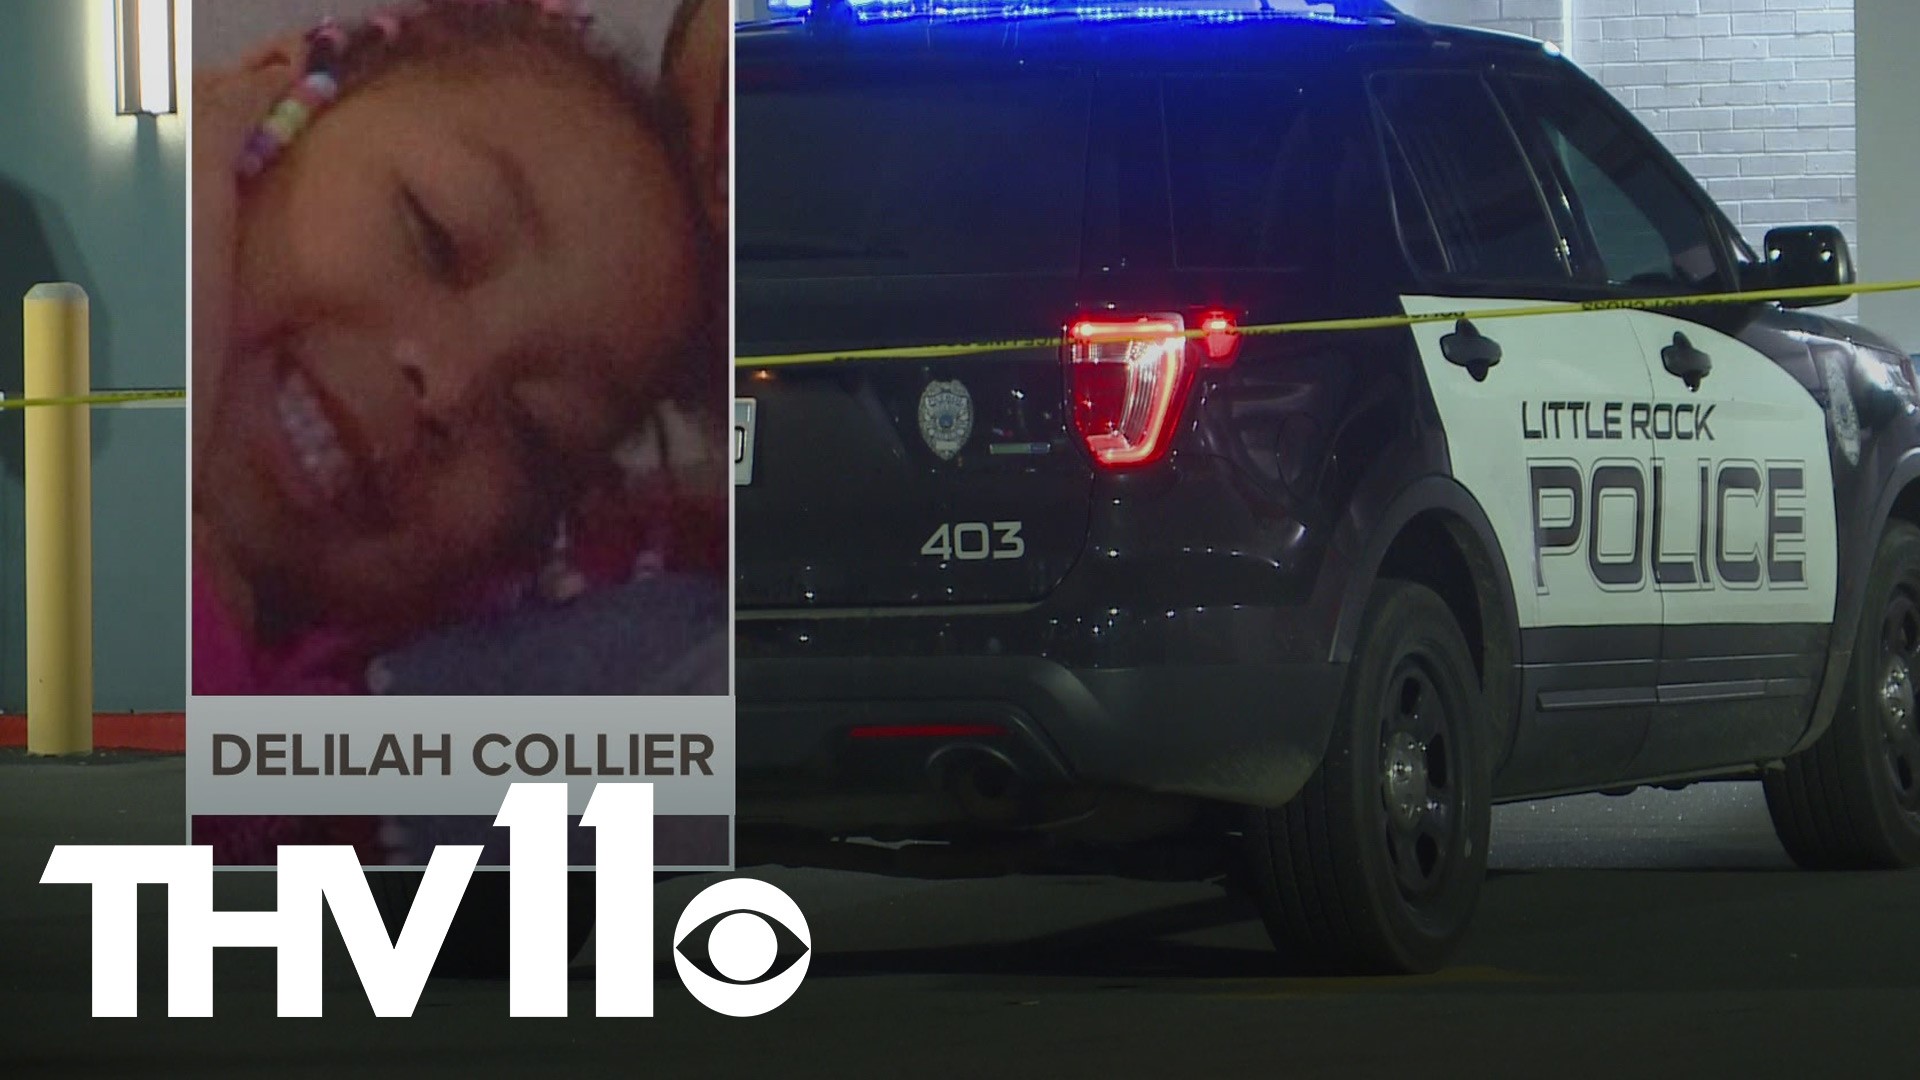 A 3-year-old is missing after a person was shot at a Little Rock Kroger. Police say the child was taken by the suspect and her mother.